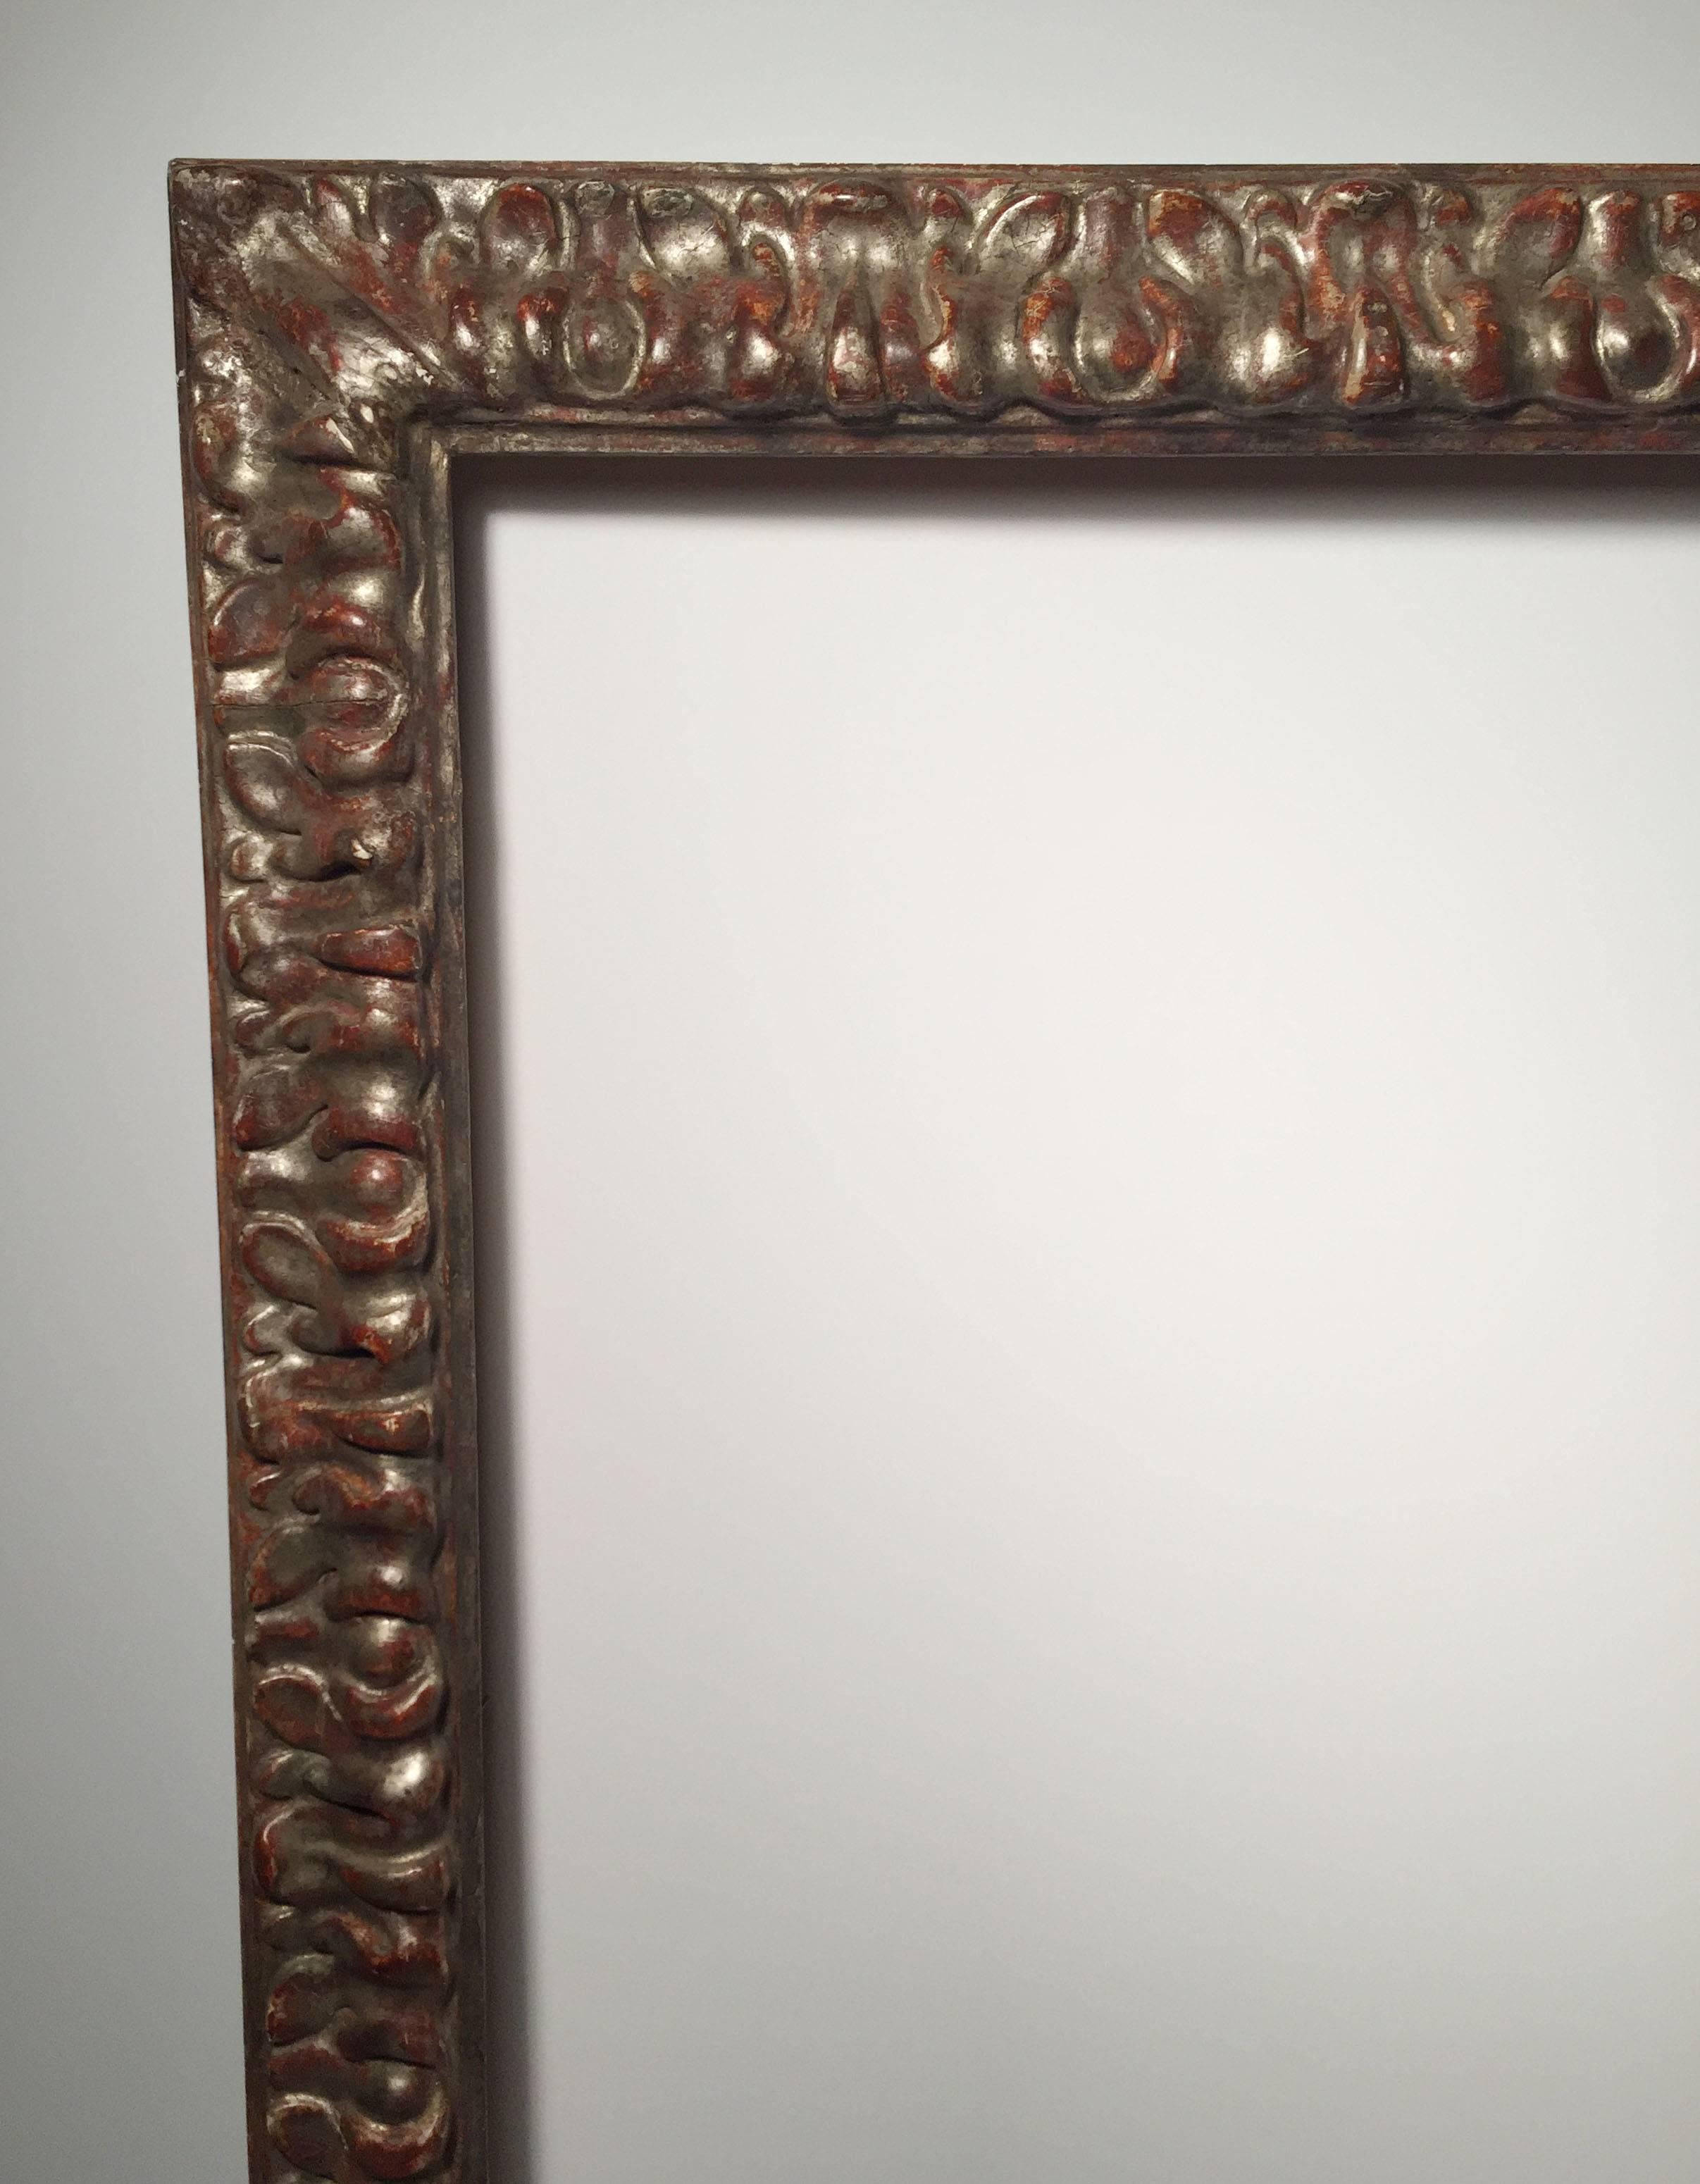 A nice vintage frame looks to be from the Mid-Century possibly earlier. Baroque in style. Possibly from Italy.